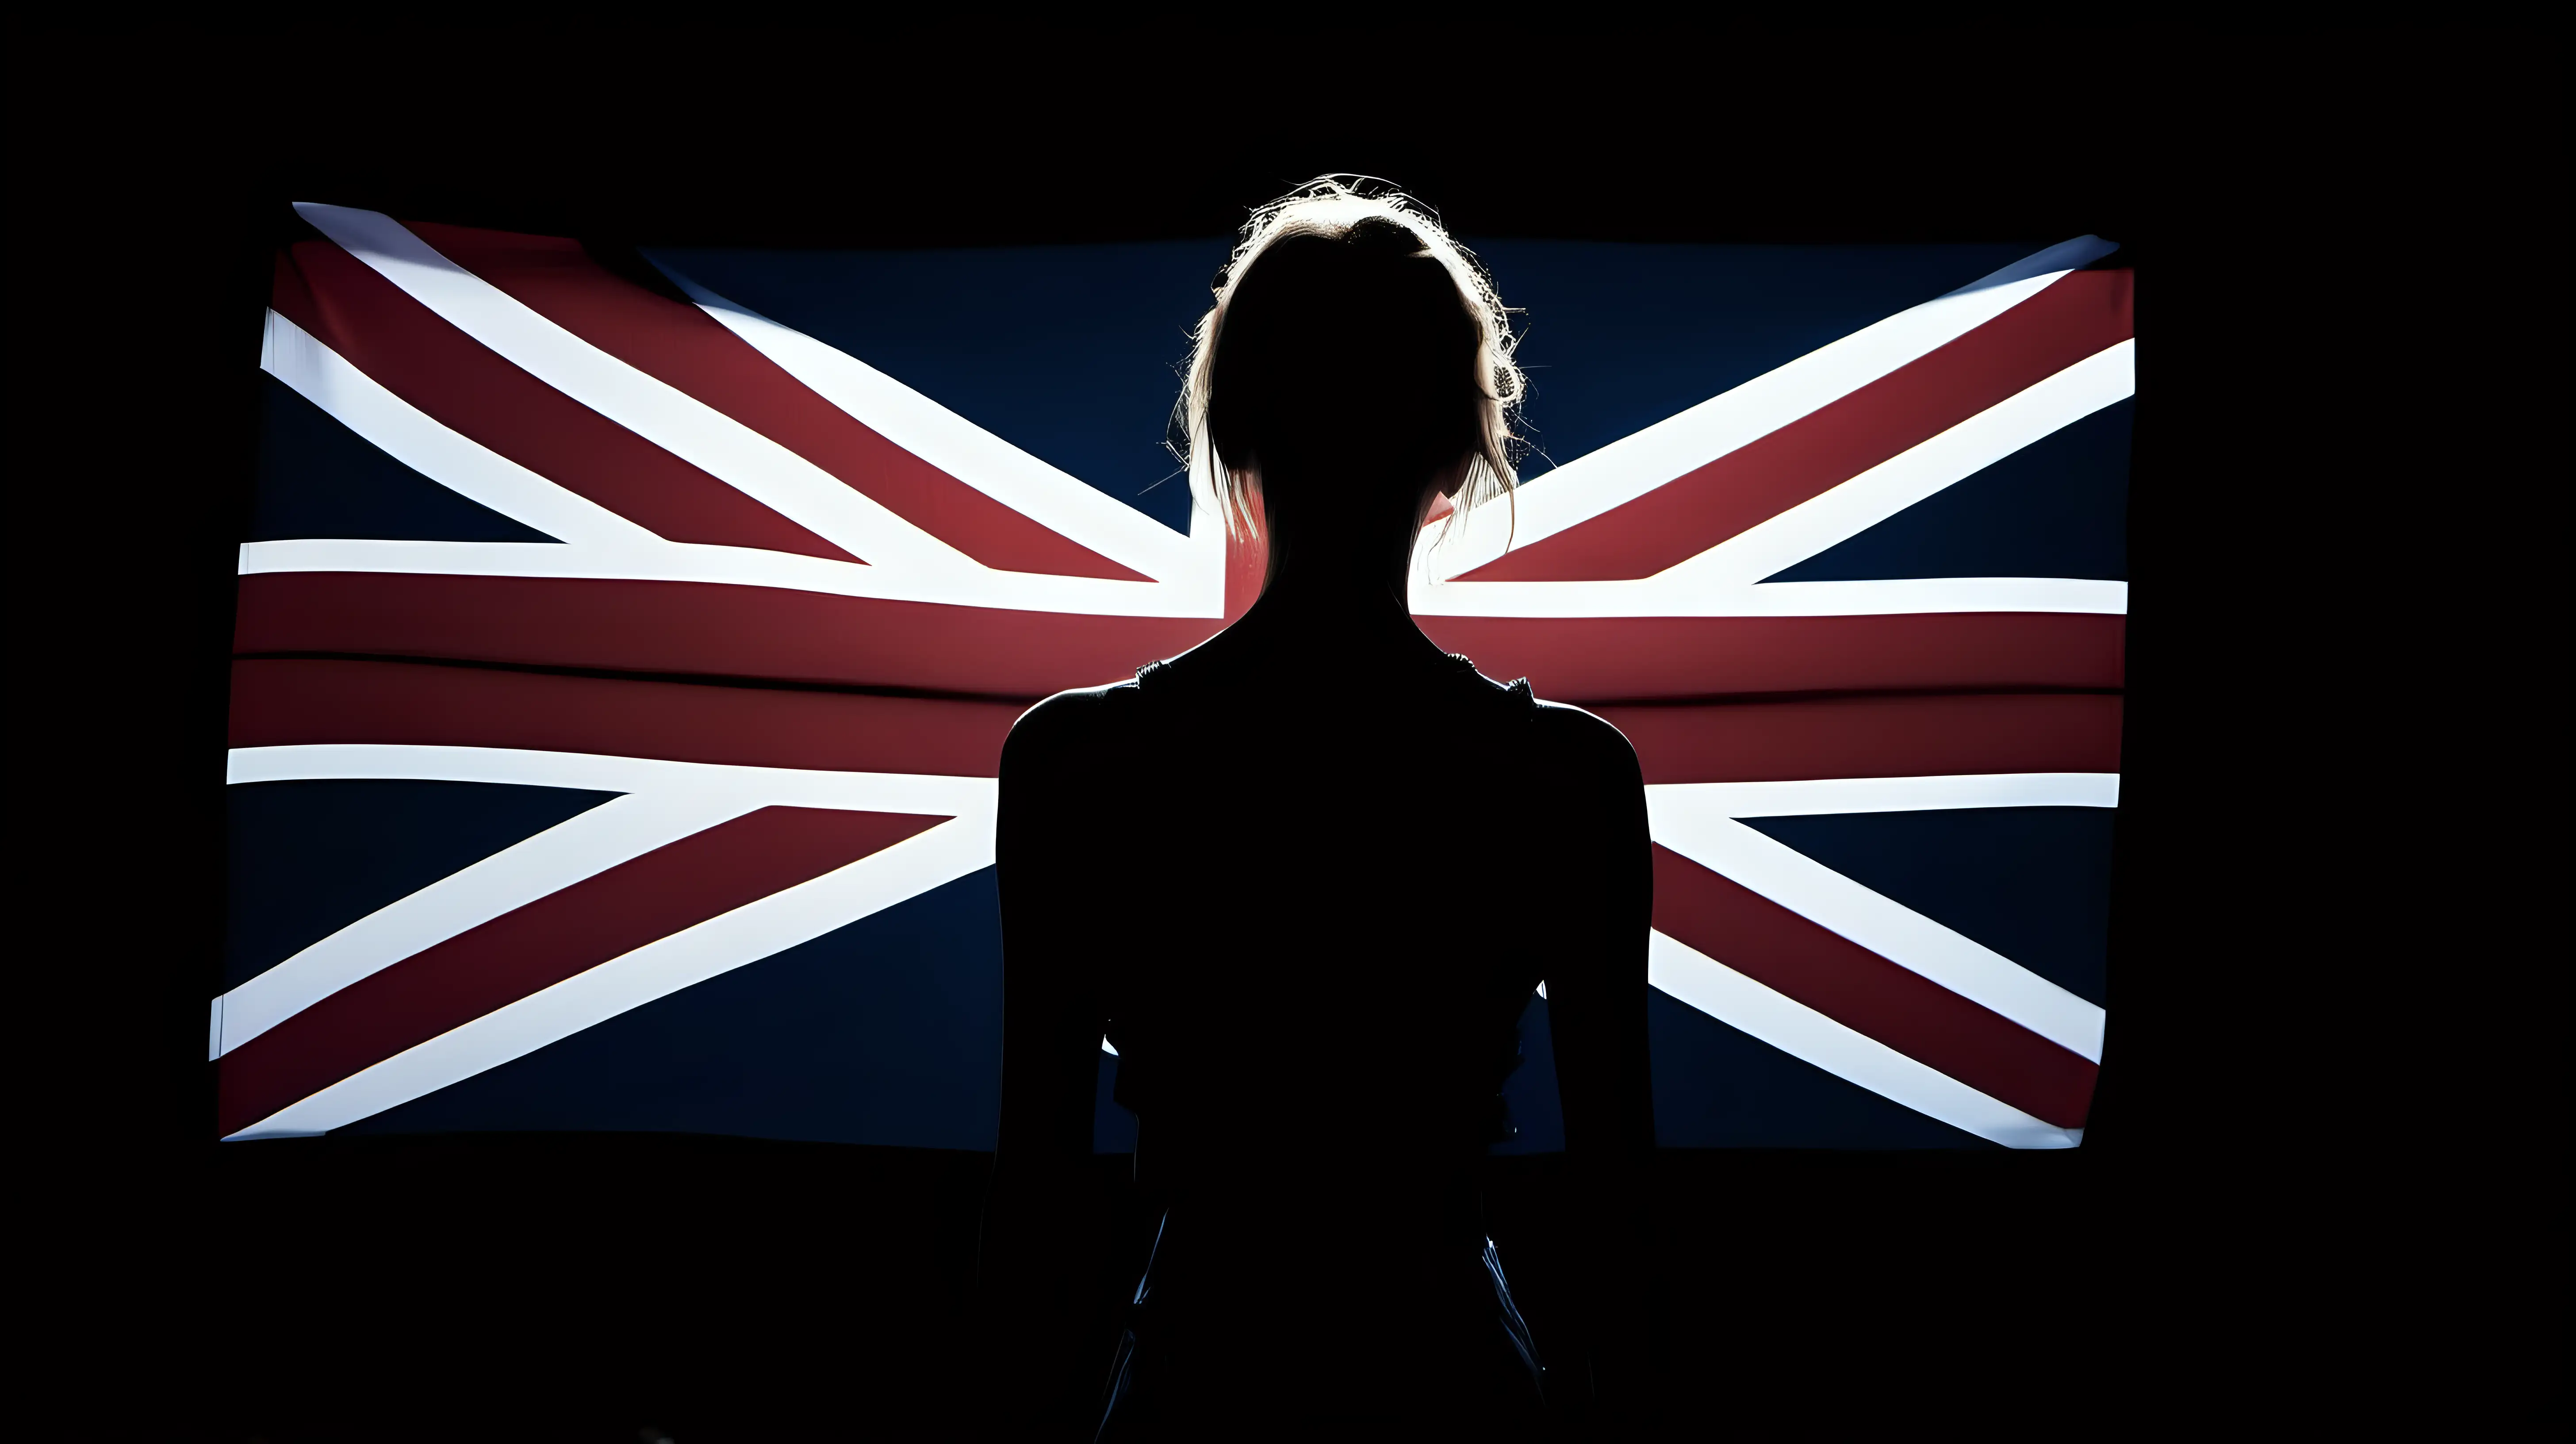 "Illuminate the darkness: Capture the silhouette of a person holding a luminous Union Jack flag against a deep black backdrop, symbolizing unwavering patriotism."